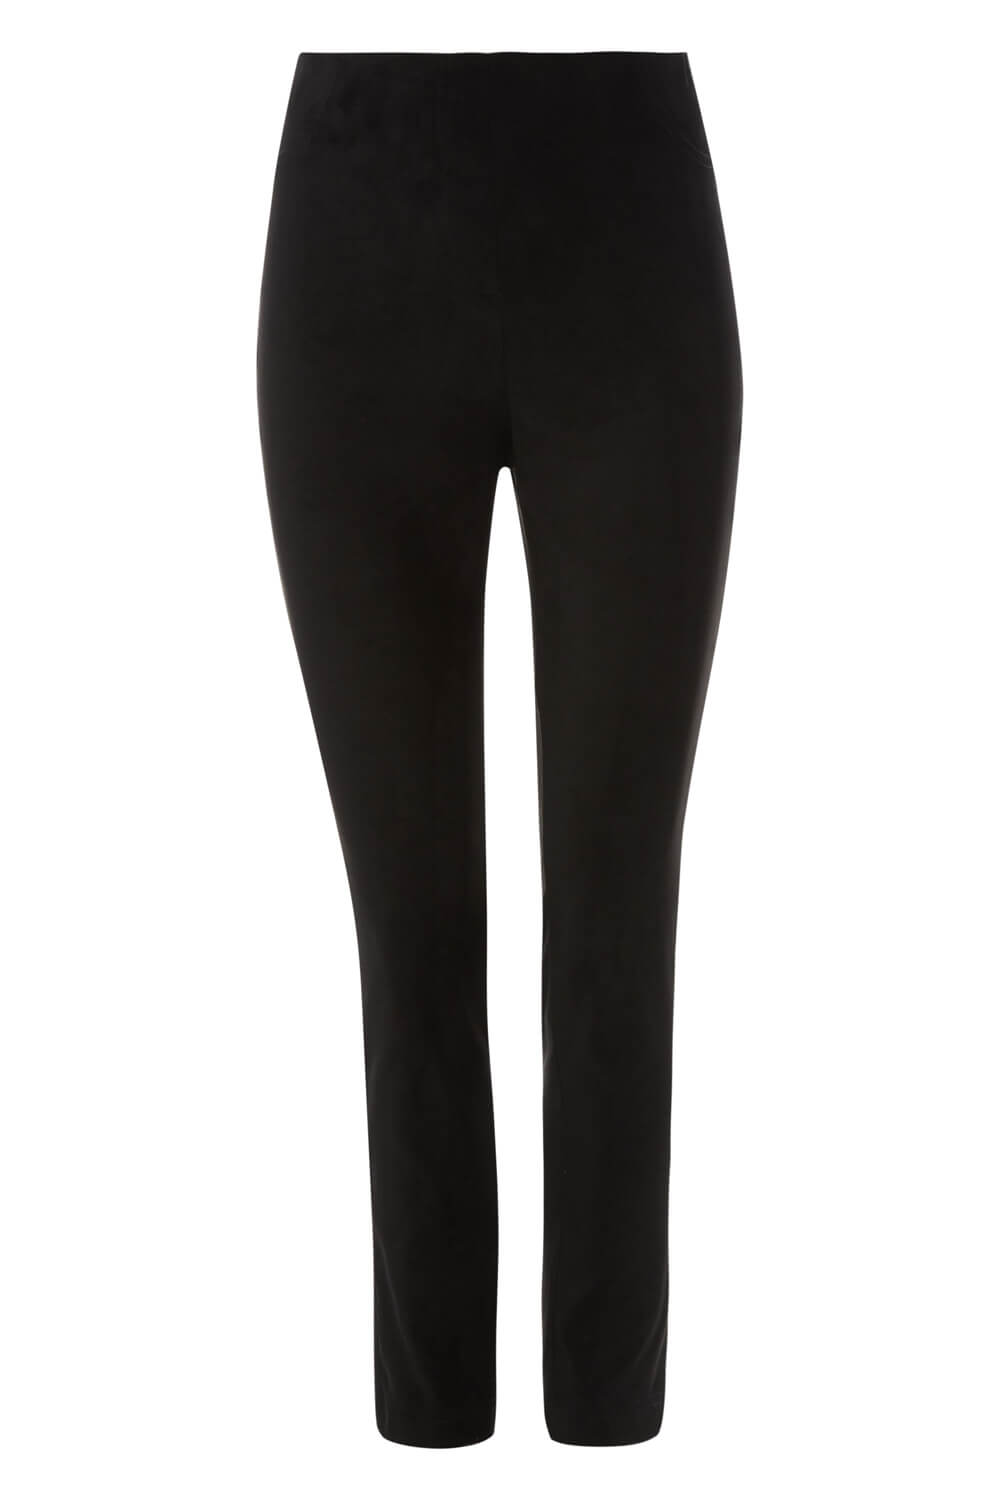 Black Full Length Suedette Stretch Trousers, Image 5 of 5